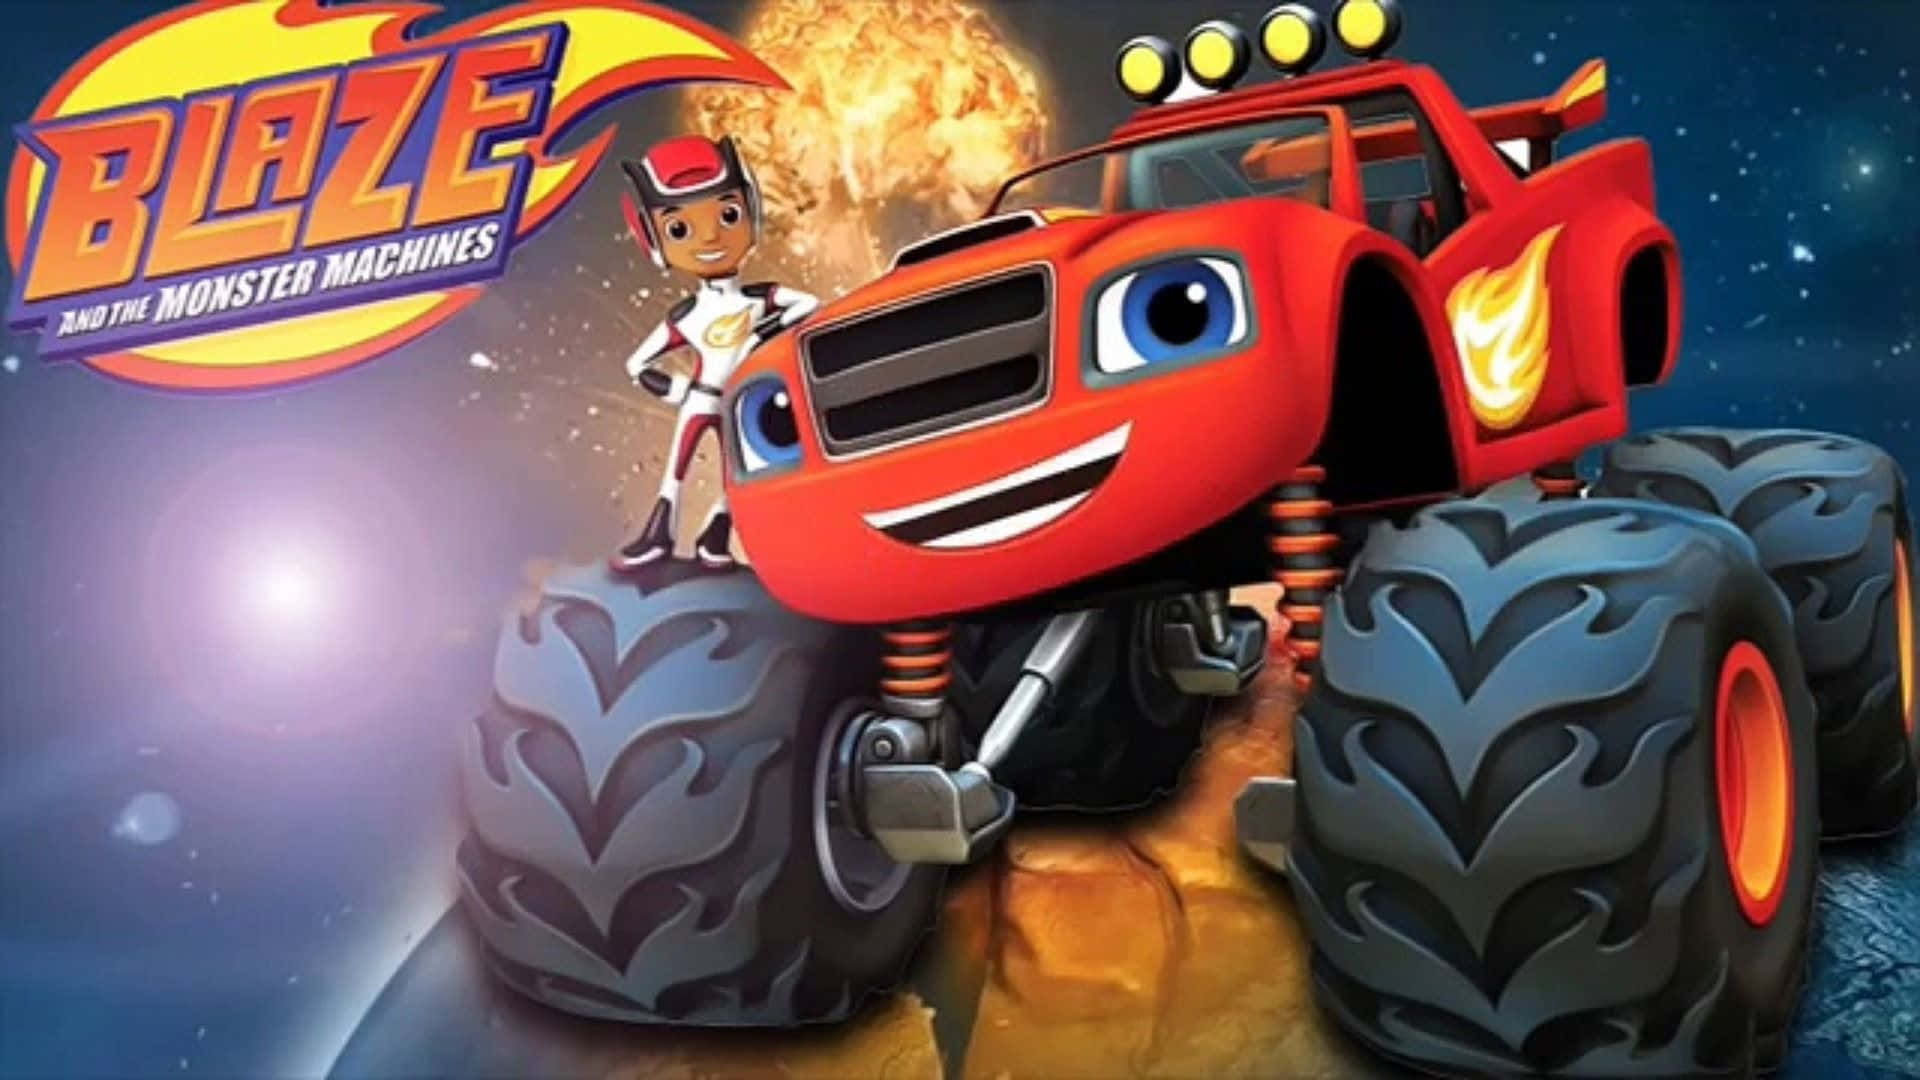 Blaze The Monster Machines - A Cartoon With A Character Driving A Truck